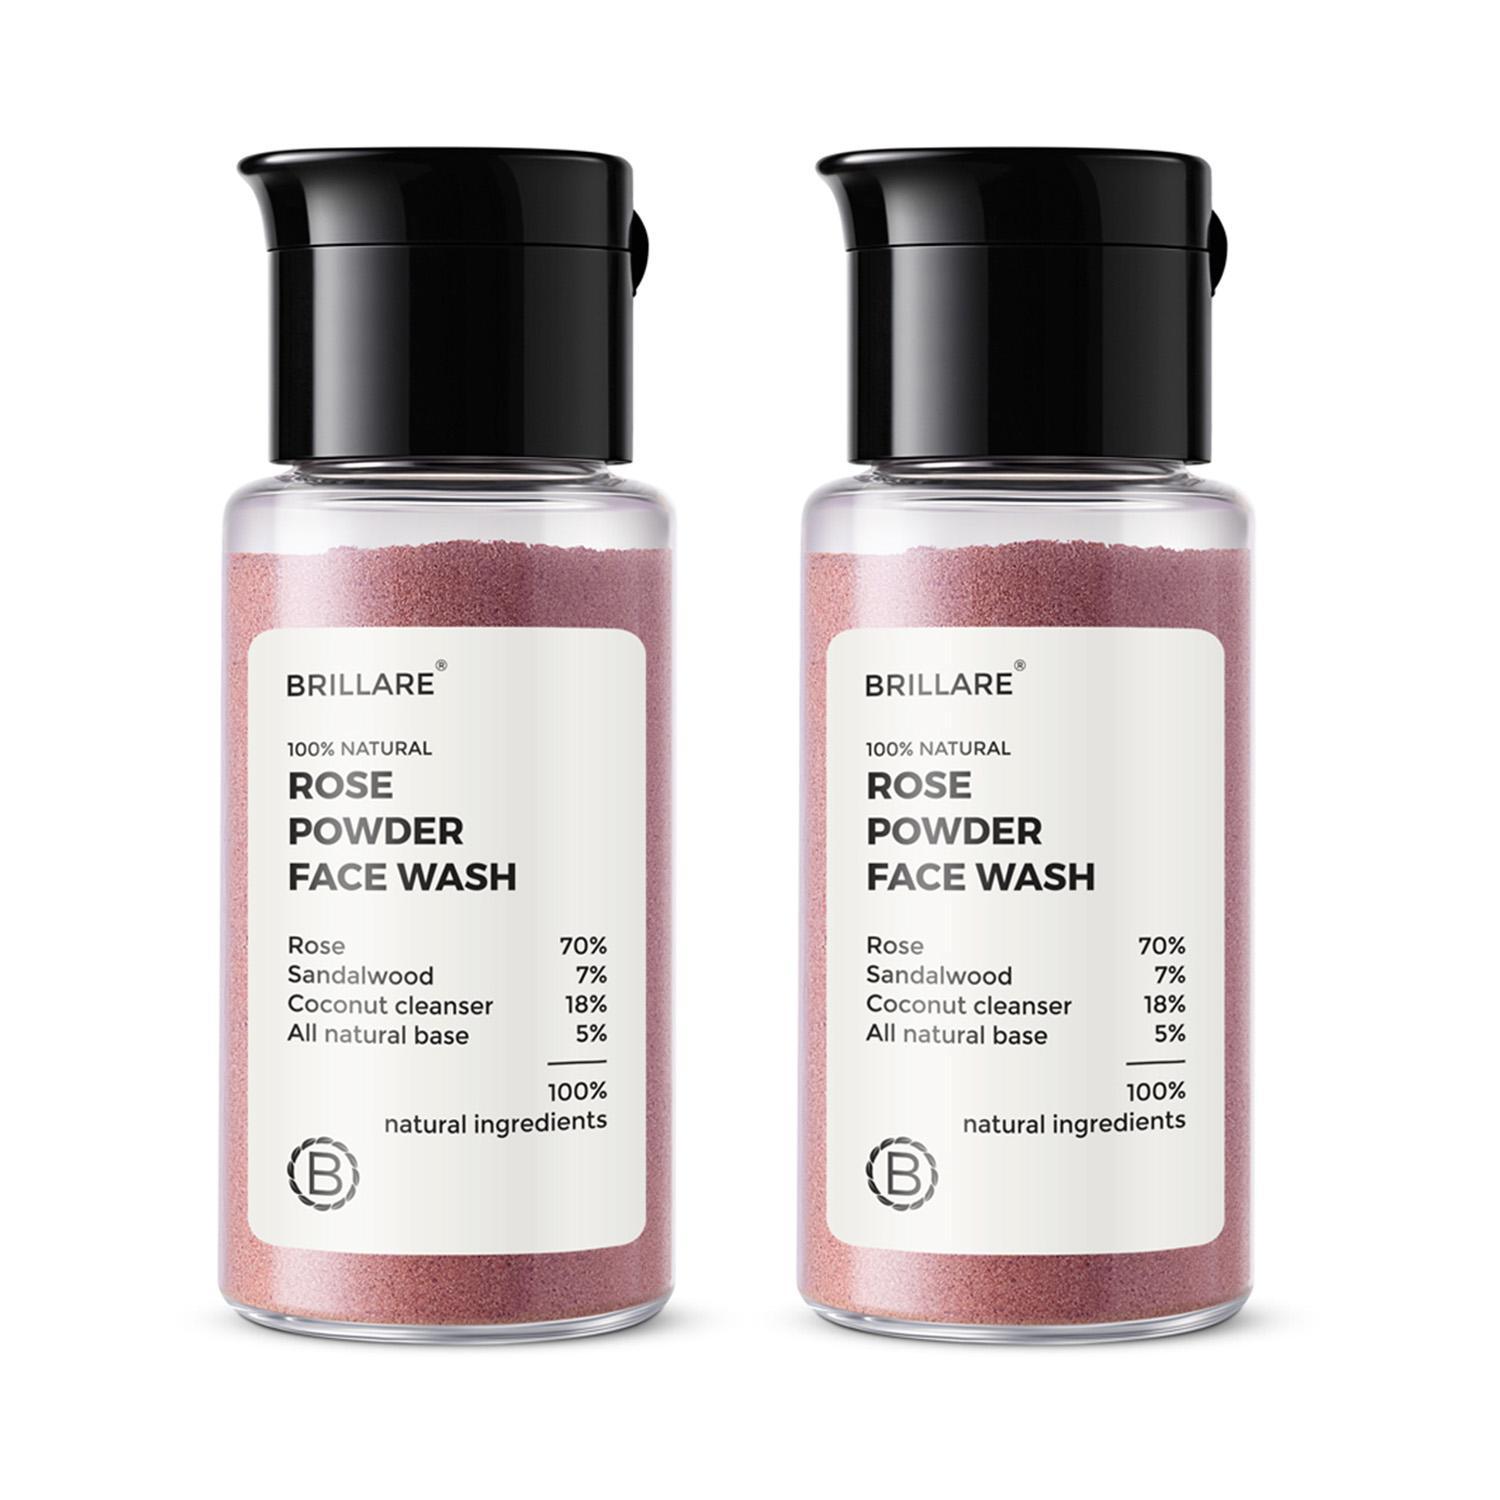 Brillare | Brillare Rose Powder Face Wash (15g) Combo For Hydrated, Younger Looking Skin